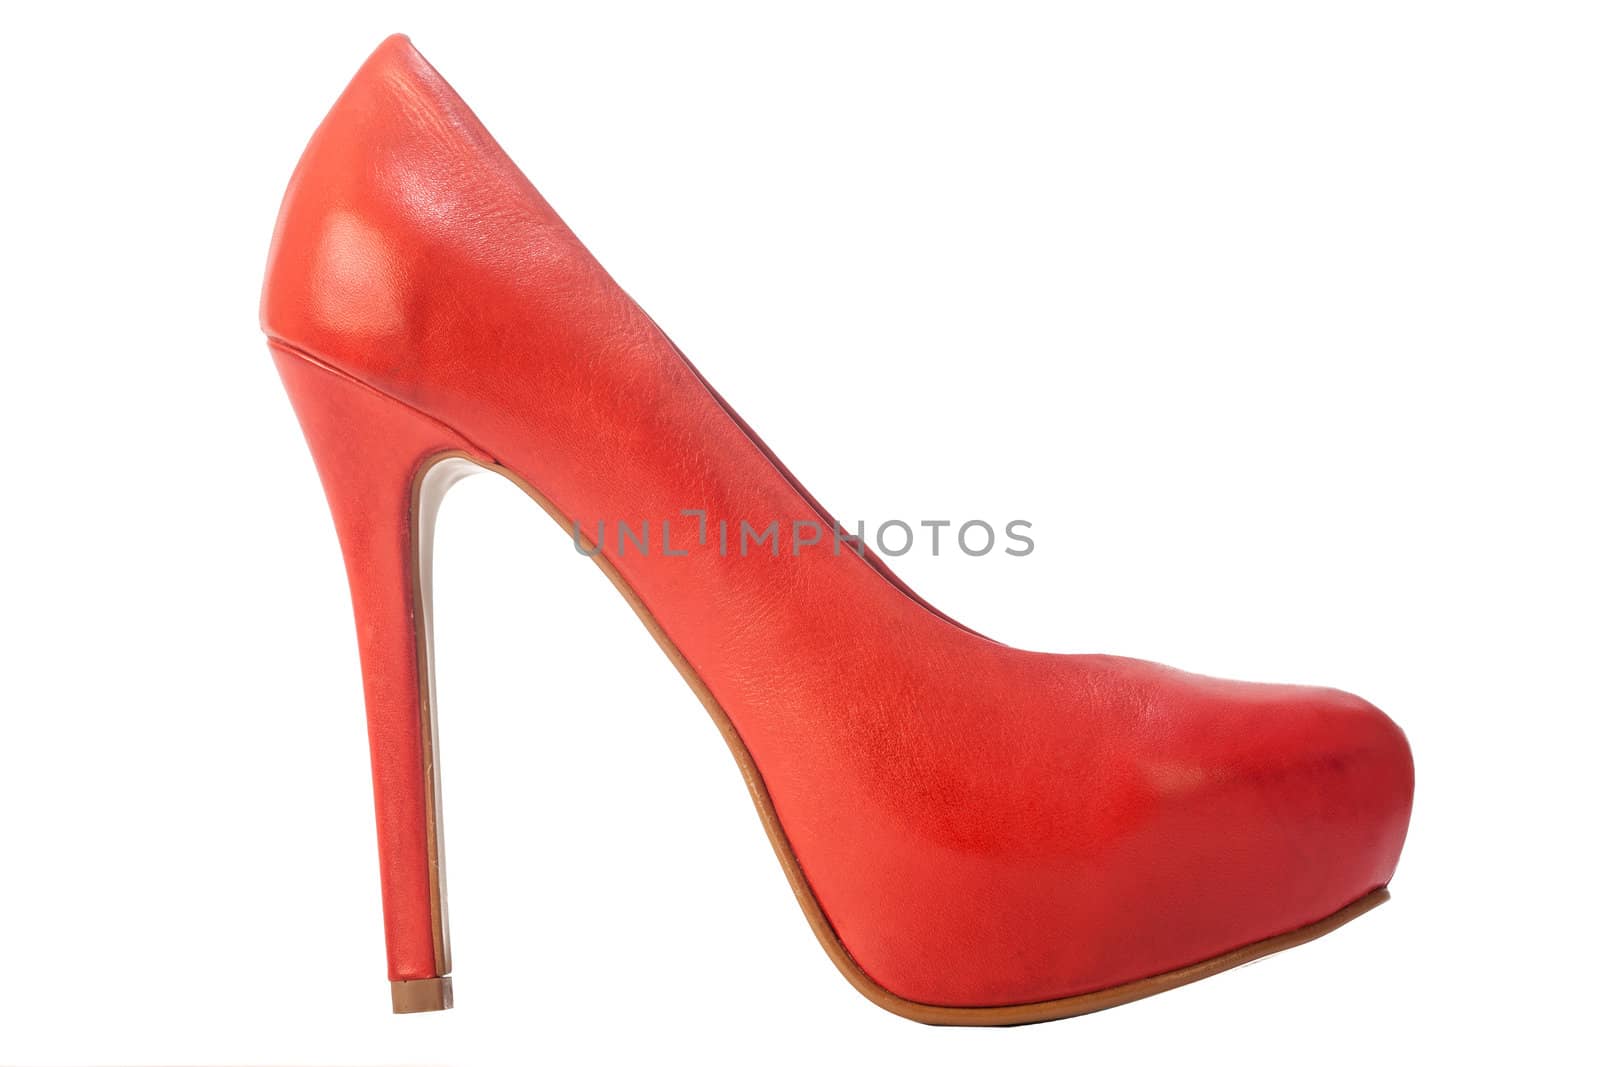 A single red, very elegant, high heel ladies shoe, isolated on a white background.